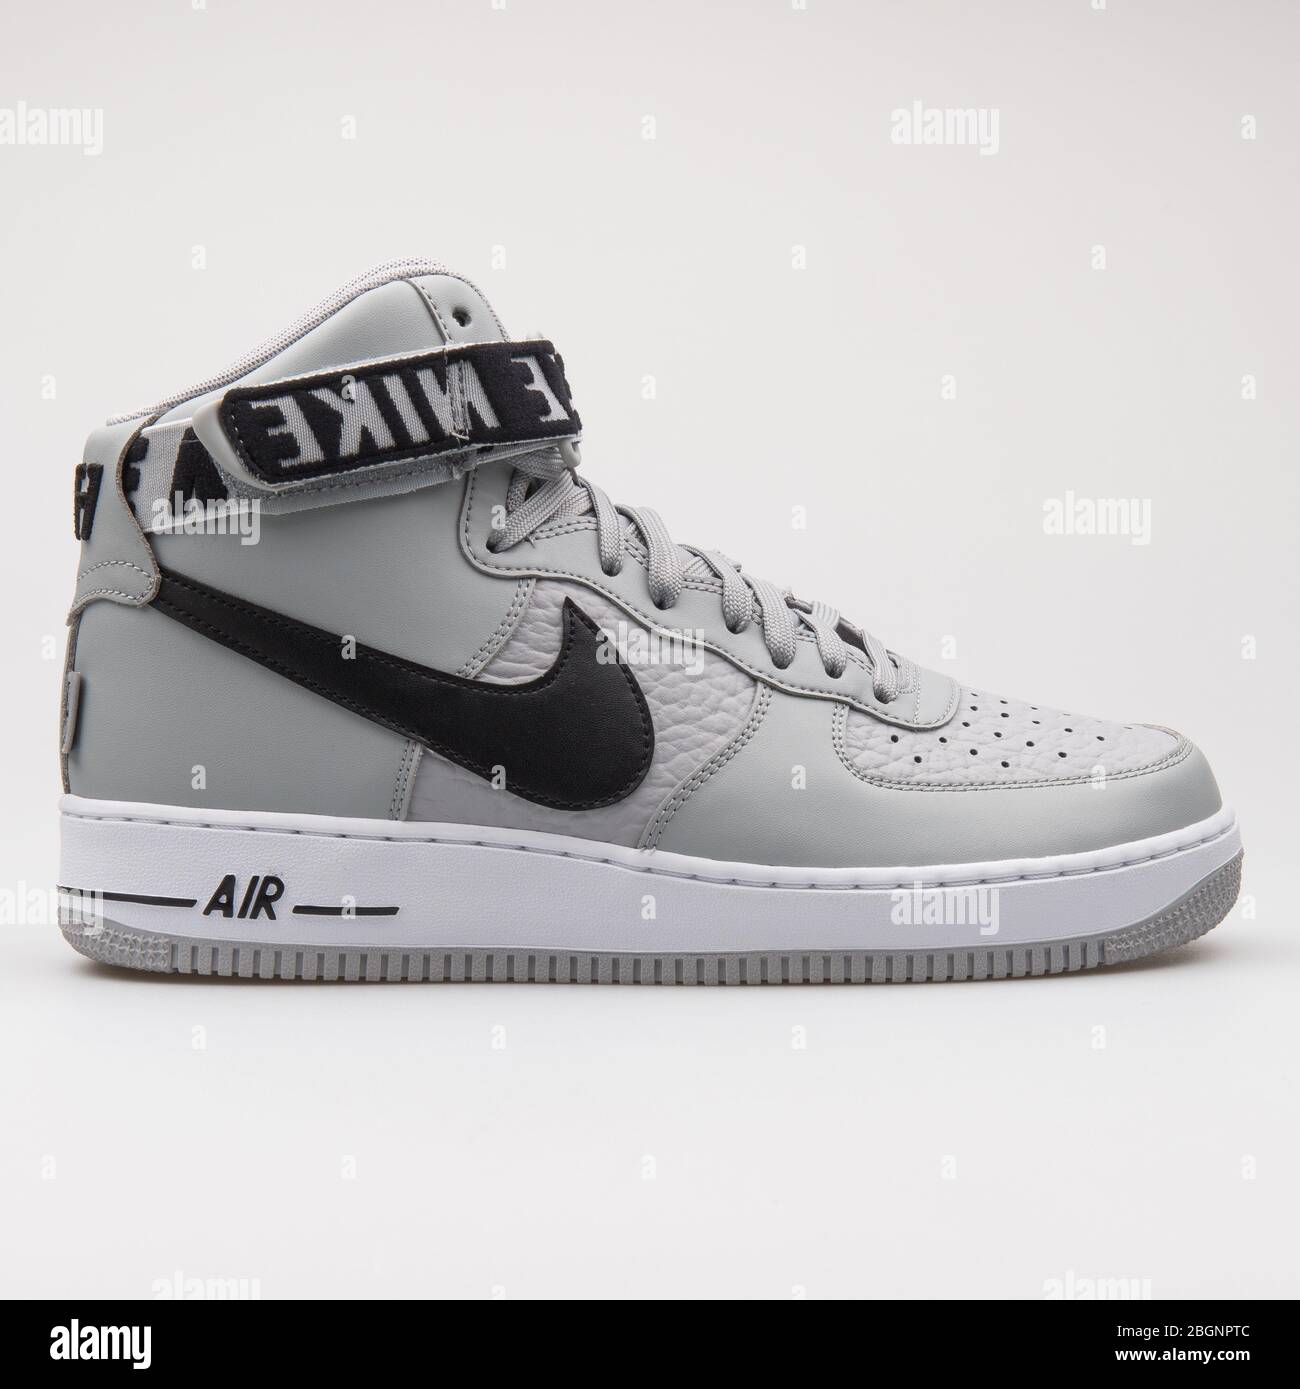 Nike Air Force High 07 High Resolution Stock Photography and Images - Alamy